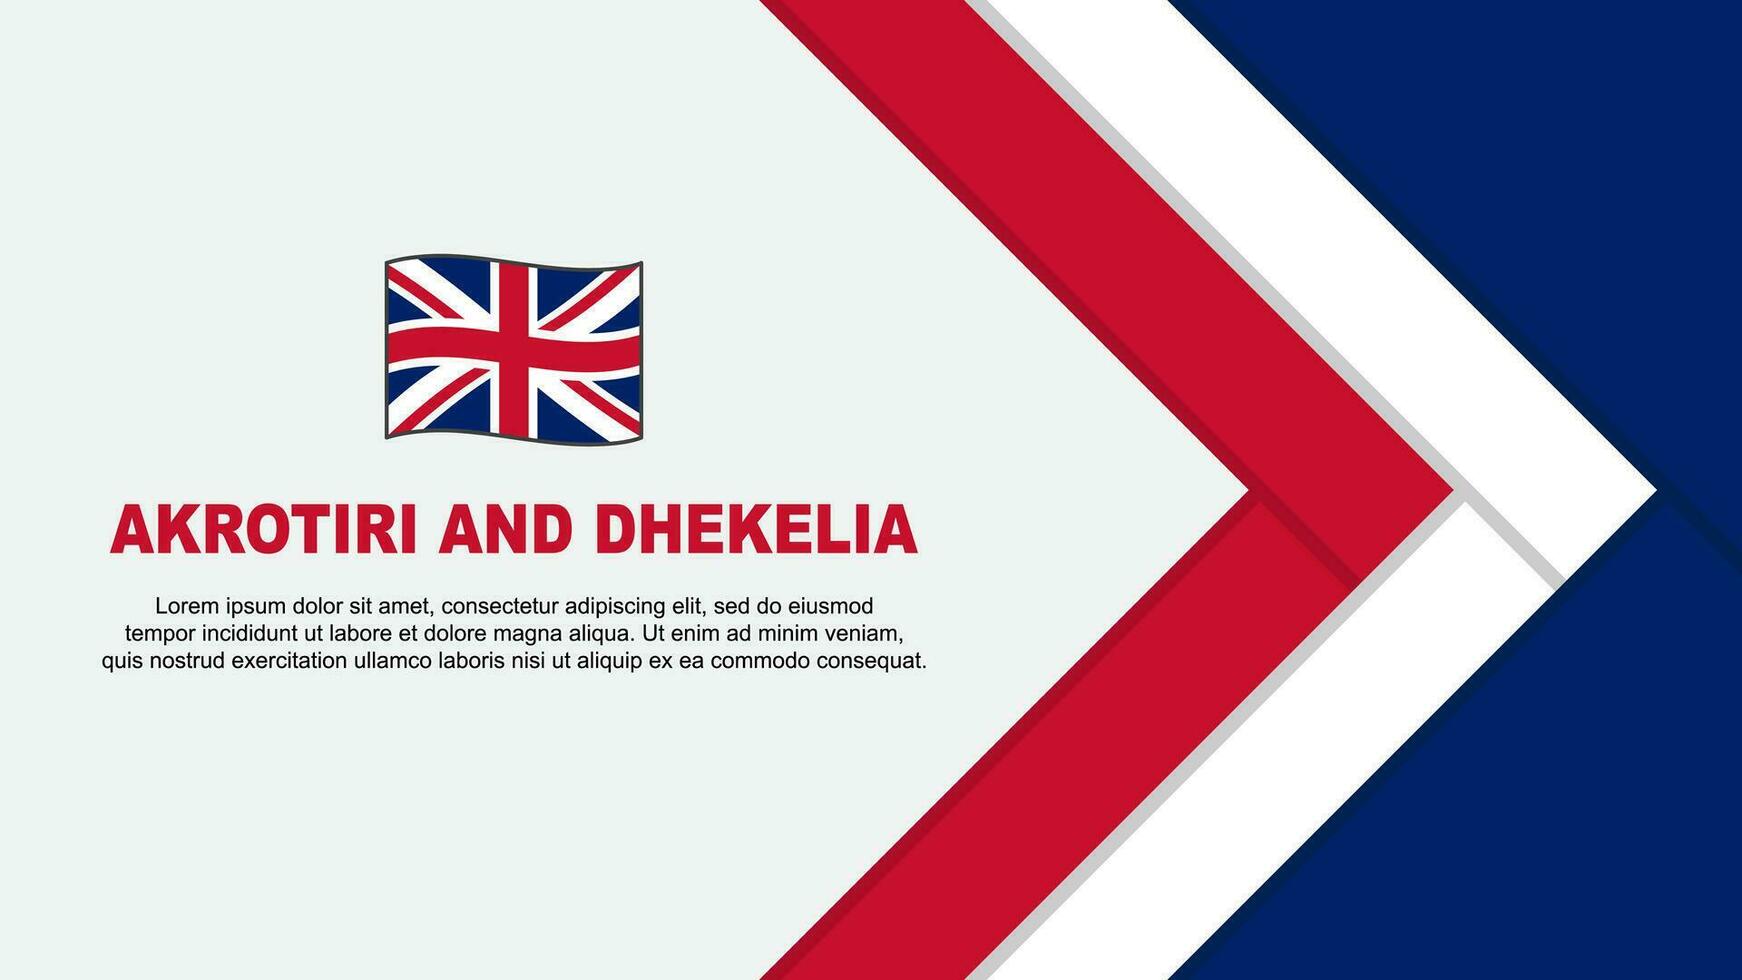 Akrotiri And Dhekelia Flag Abstract Background Design Template. Akrotiri And Dhekelia Independence Day Banner Cartoon Vector Illustration. Akrotiri And Dhekelia Cartoon